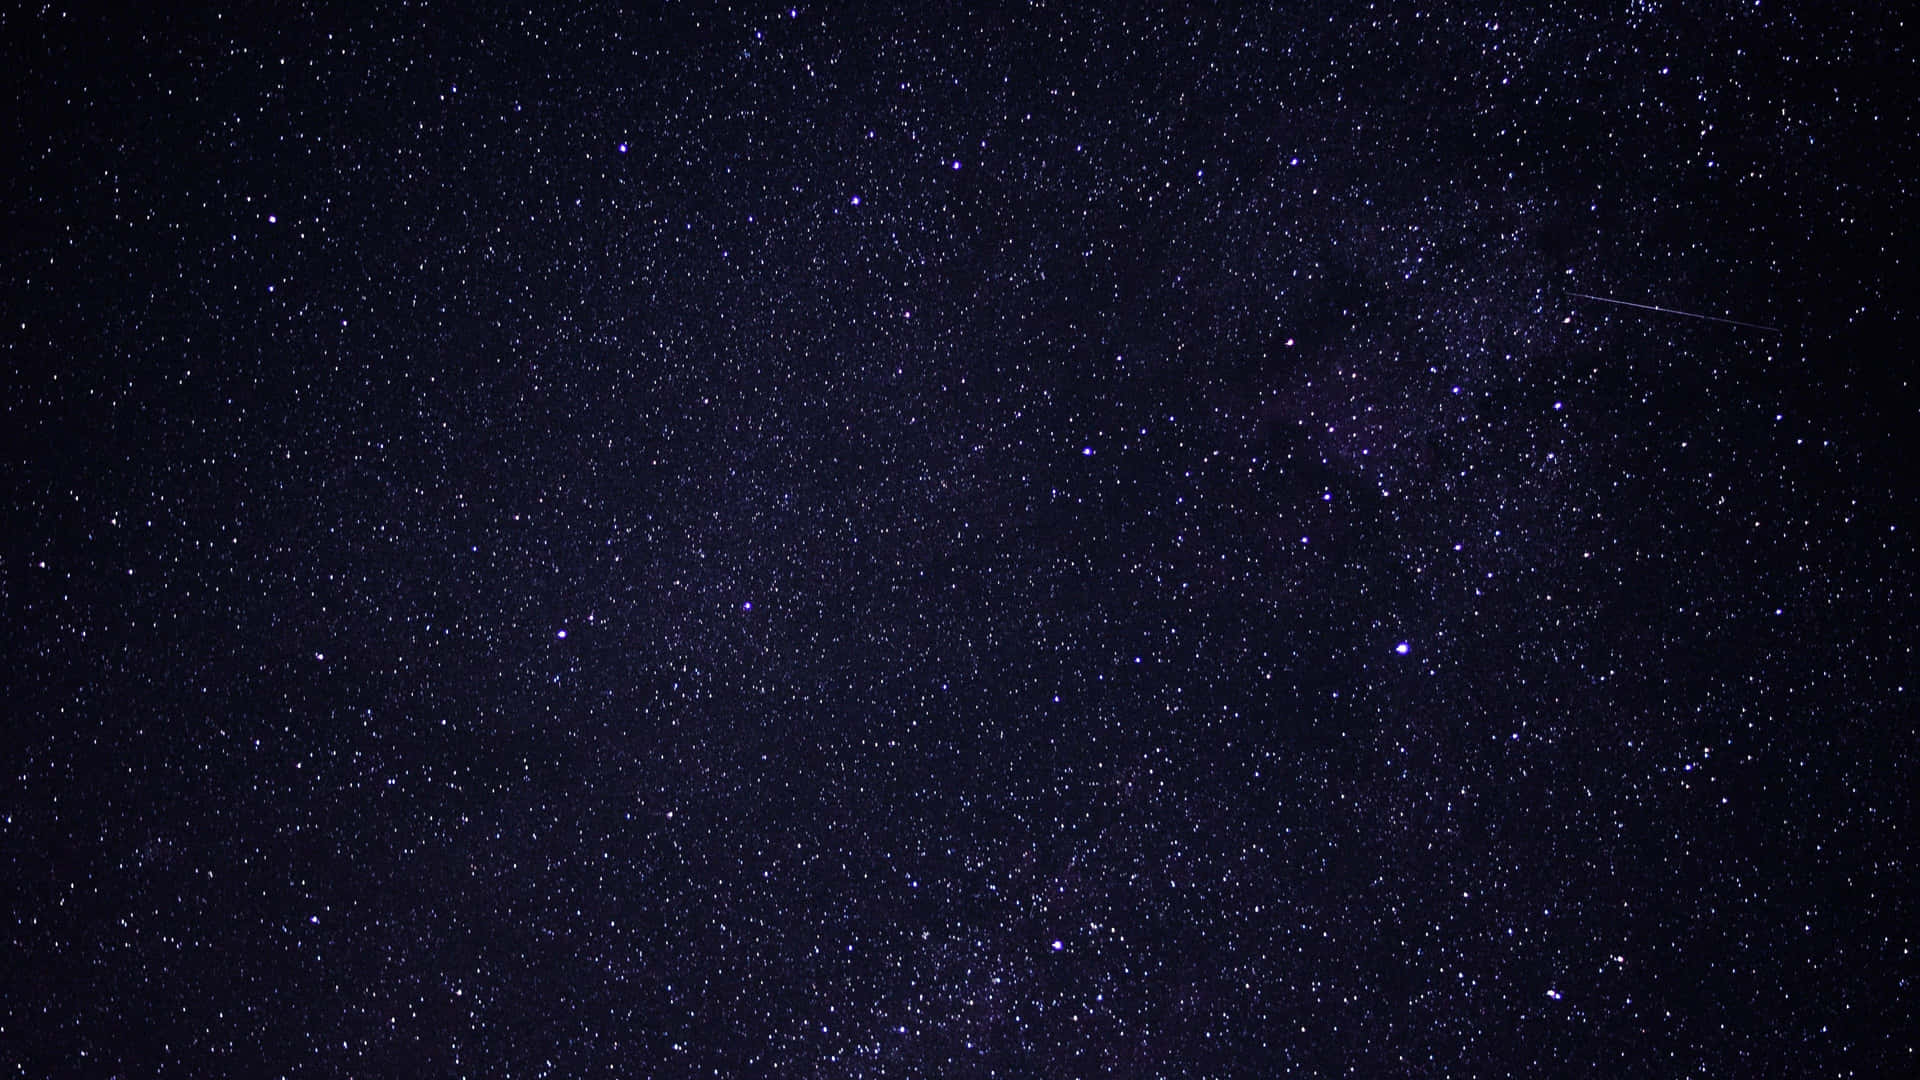 "A night view of a starry sky, filled with glistening stars" Wallpaper